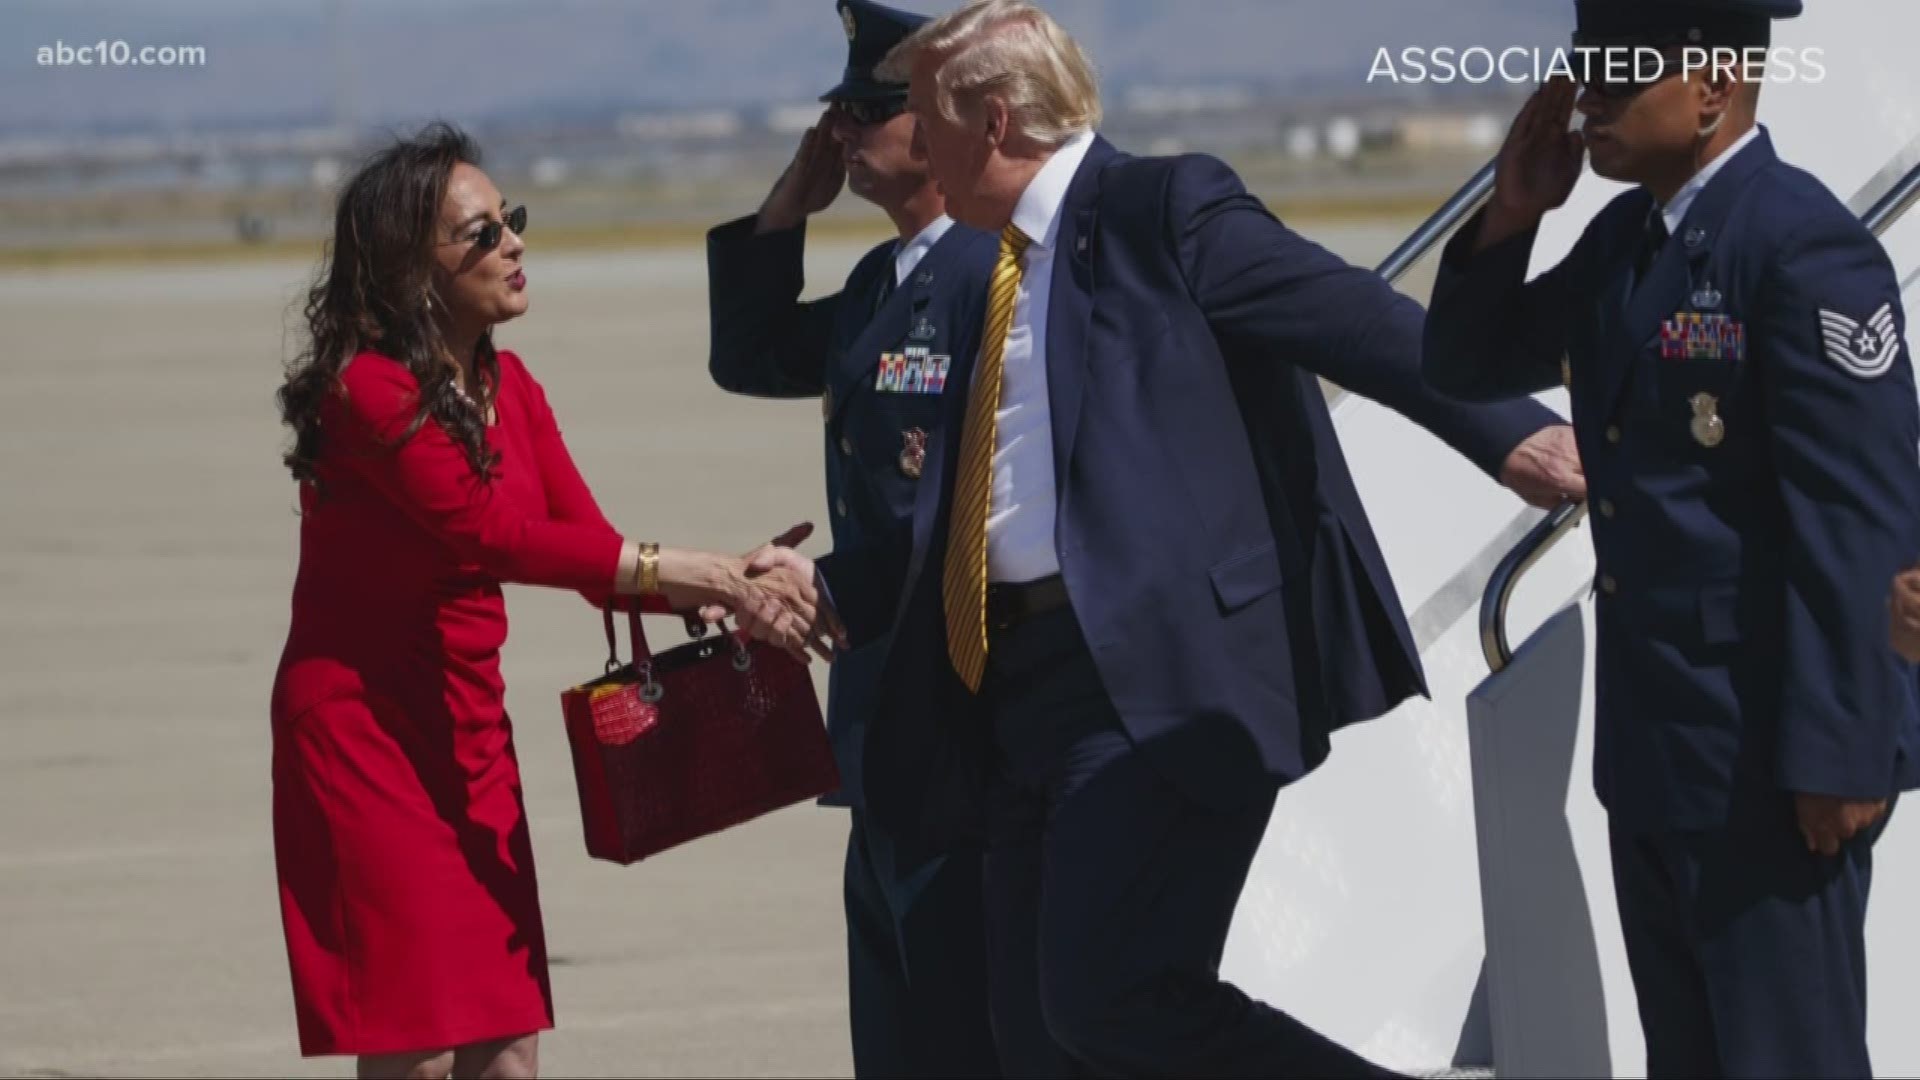 President Trump is in California on a 2-day fundraising trip. He started the day in the Bay Area for a fundraiser in Silicon Valley. The Associated Press reports the fundraiser is expected to bring in about $3 million for his campaign. The events were closed to the press, but cameras were there on the tarmac as the president arrived in LA for his next fundraising event.